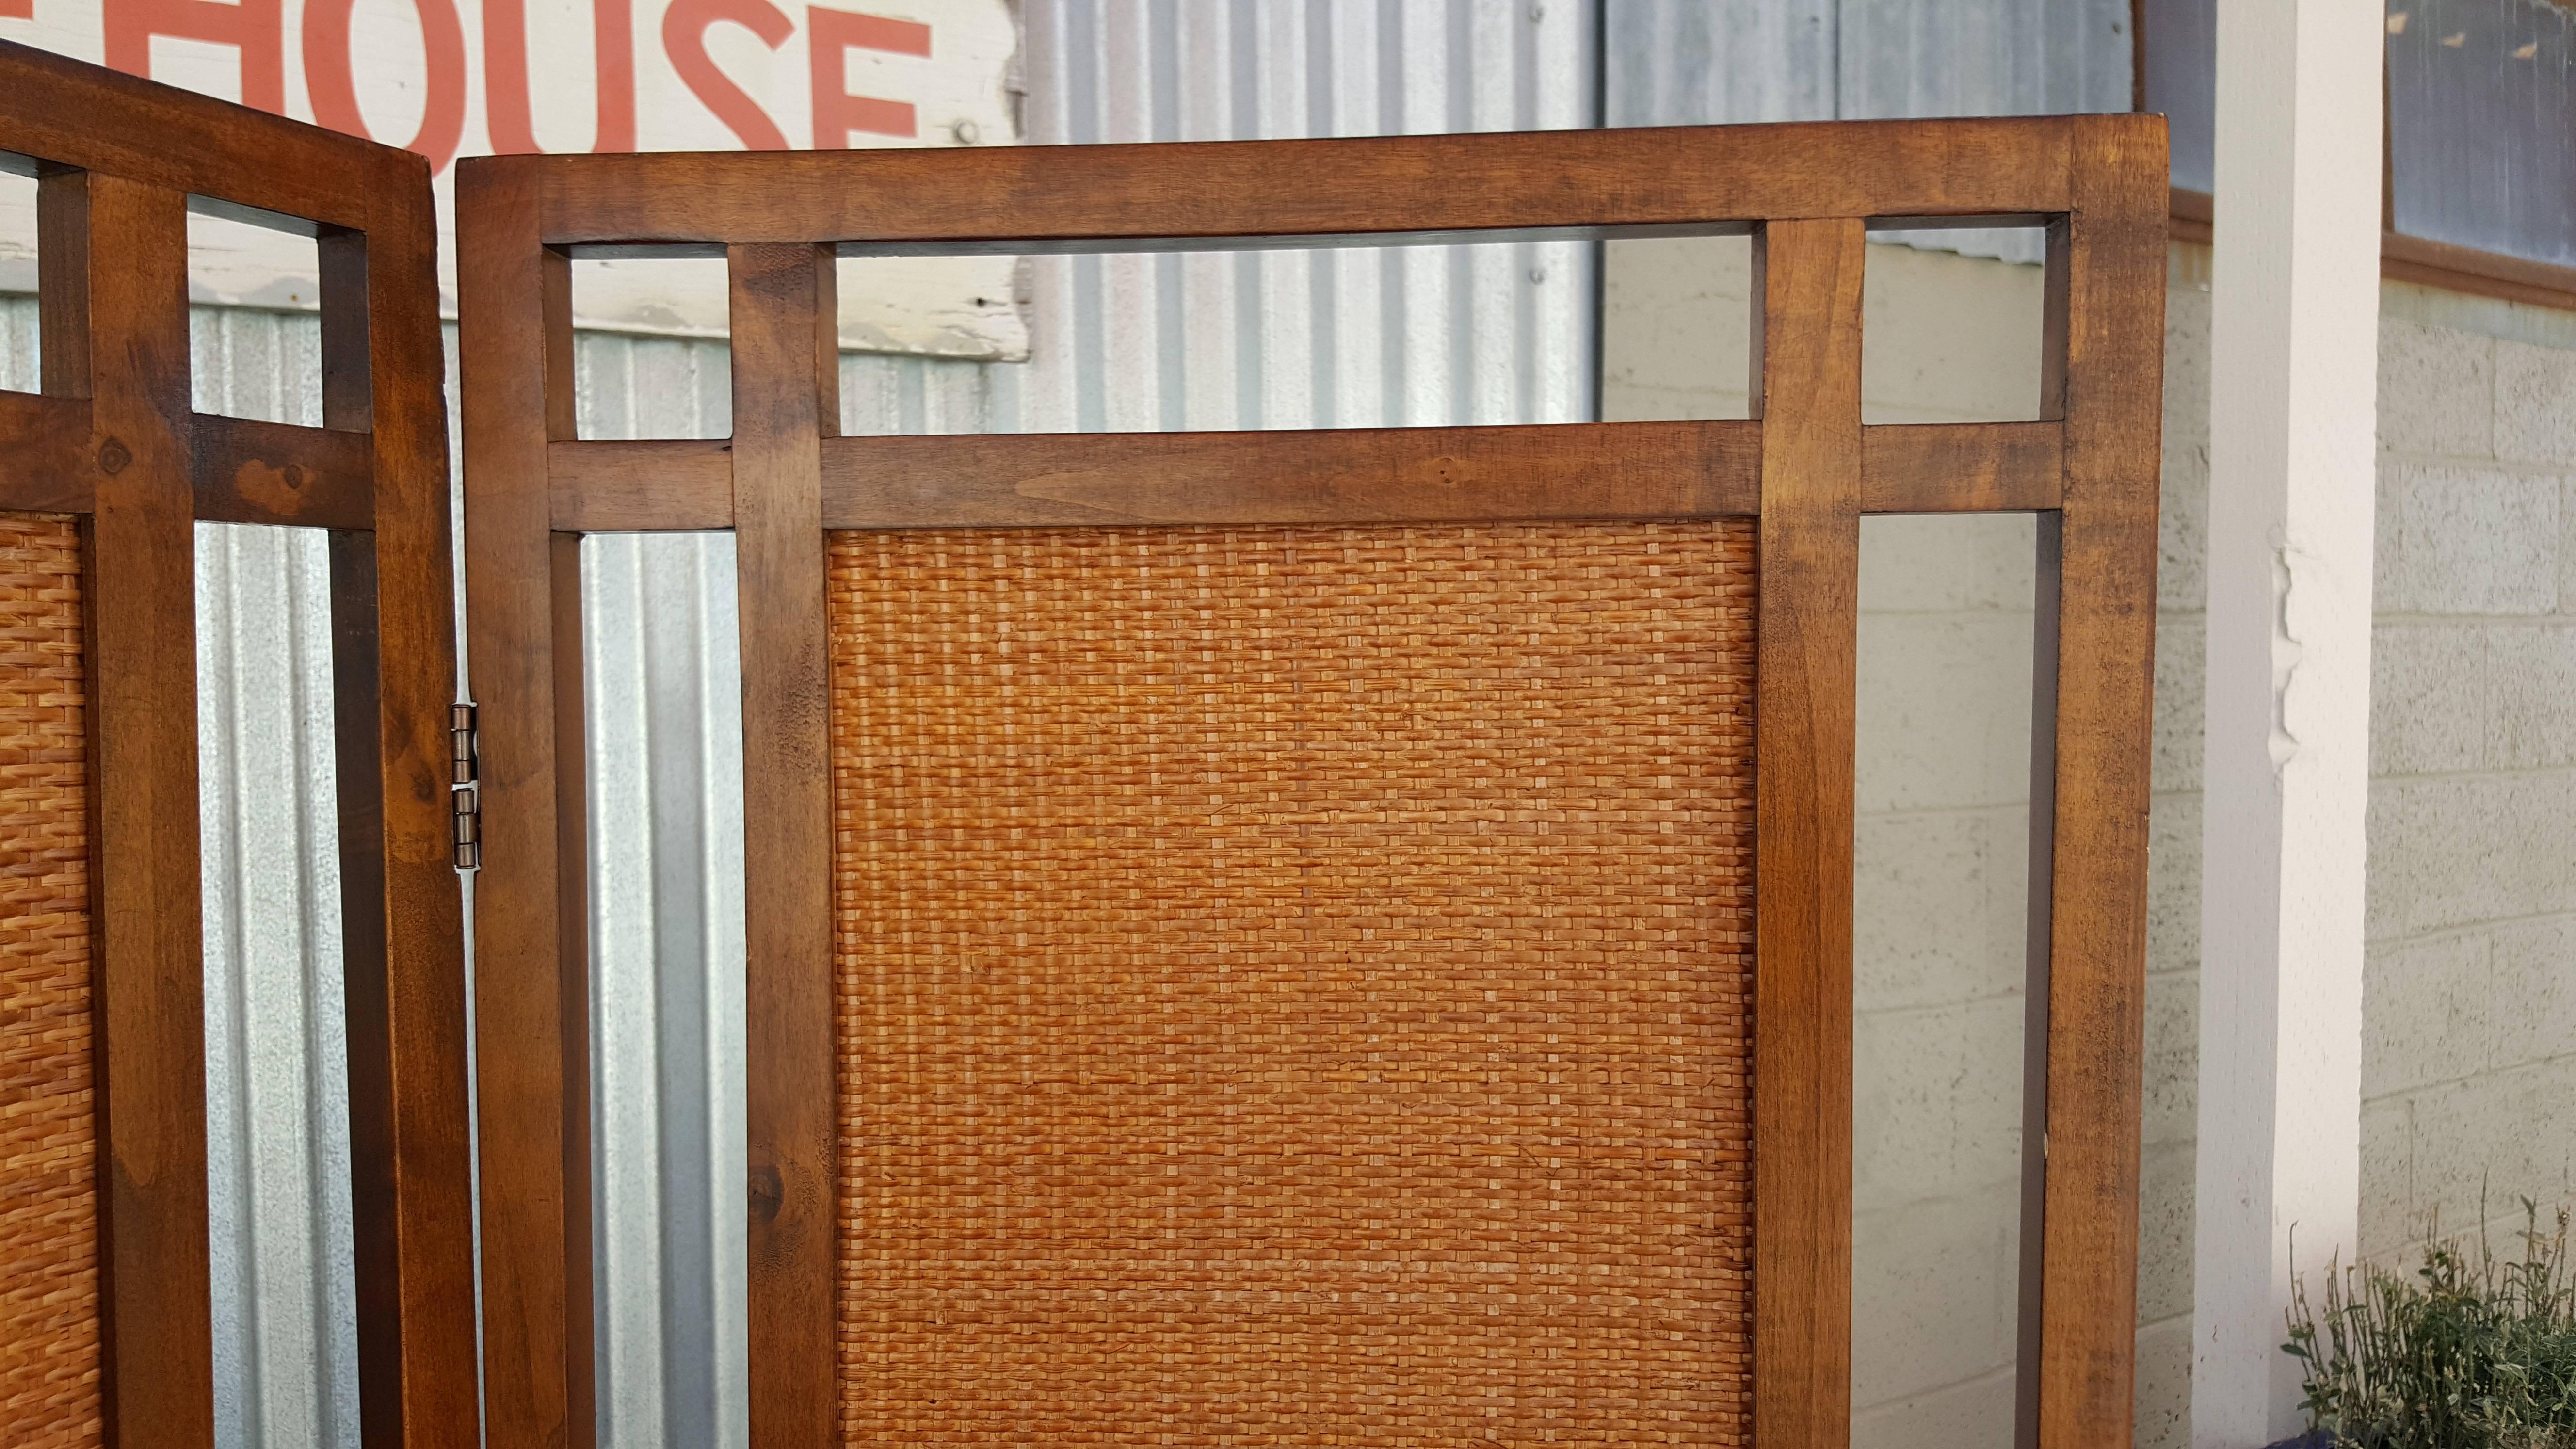 A 1960s Mid-Century Modern room divider with rectangular woven rattan panels. Nice architectural design. Each of the three panels measure 17.75